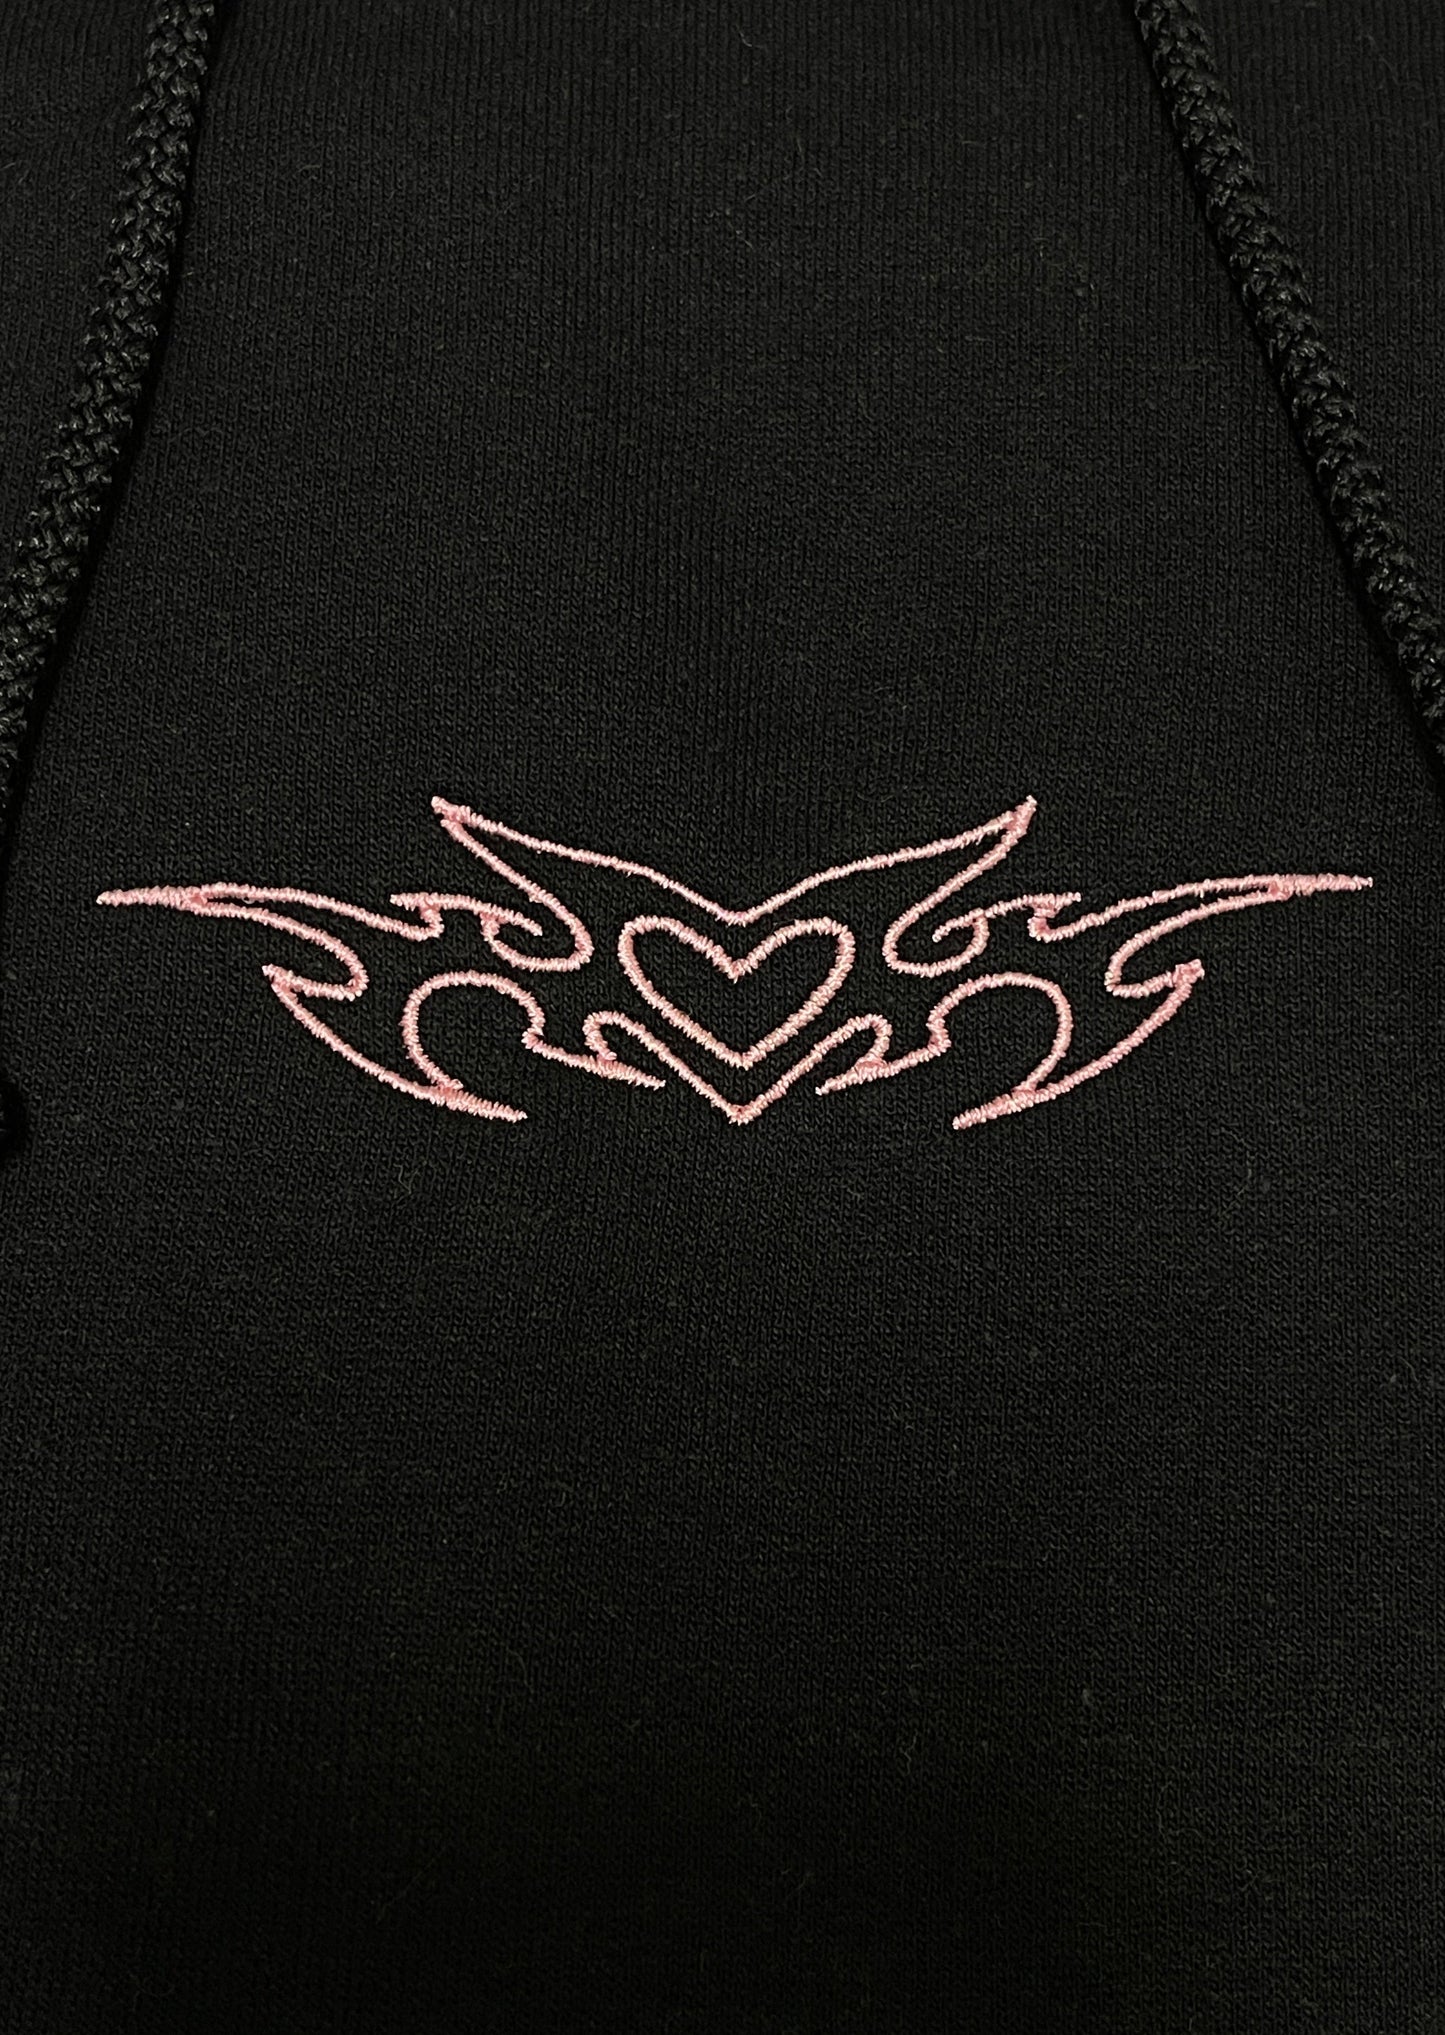 Cyber Heart Embroidery